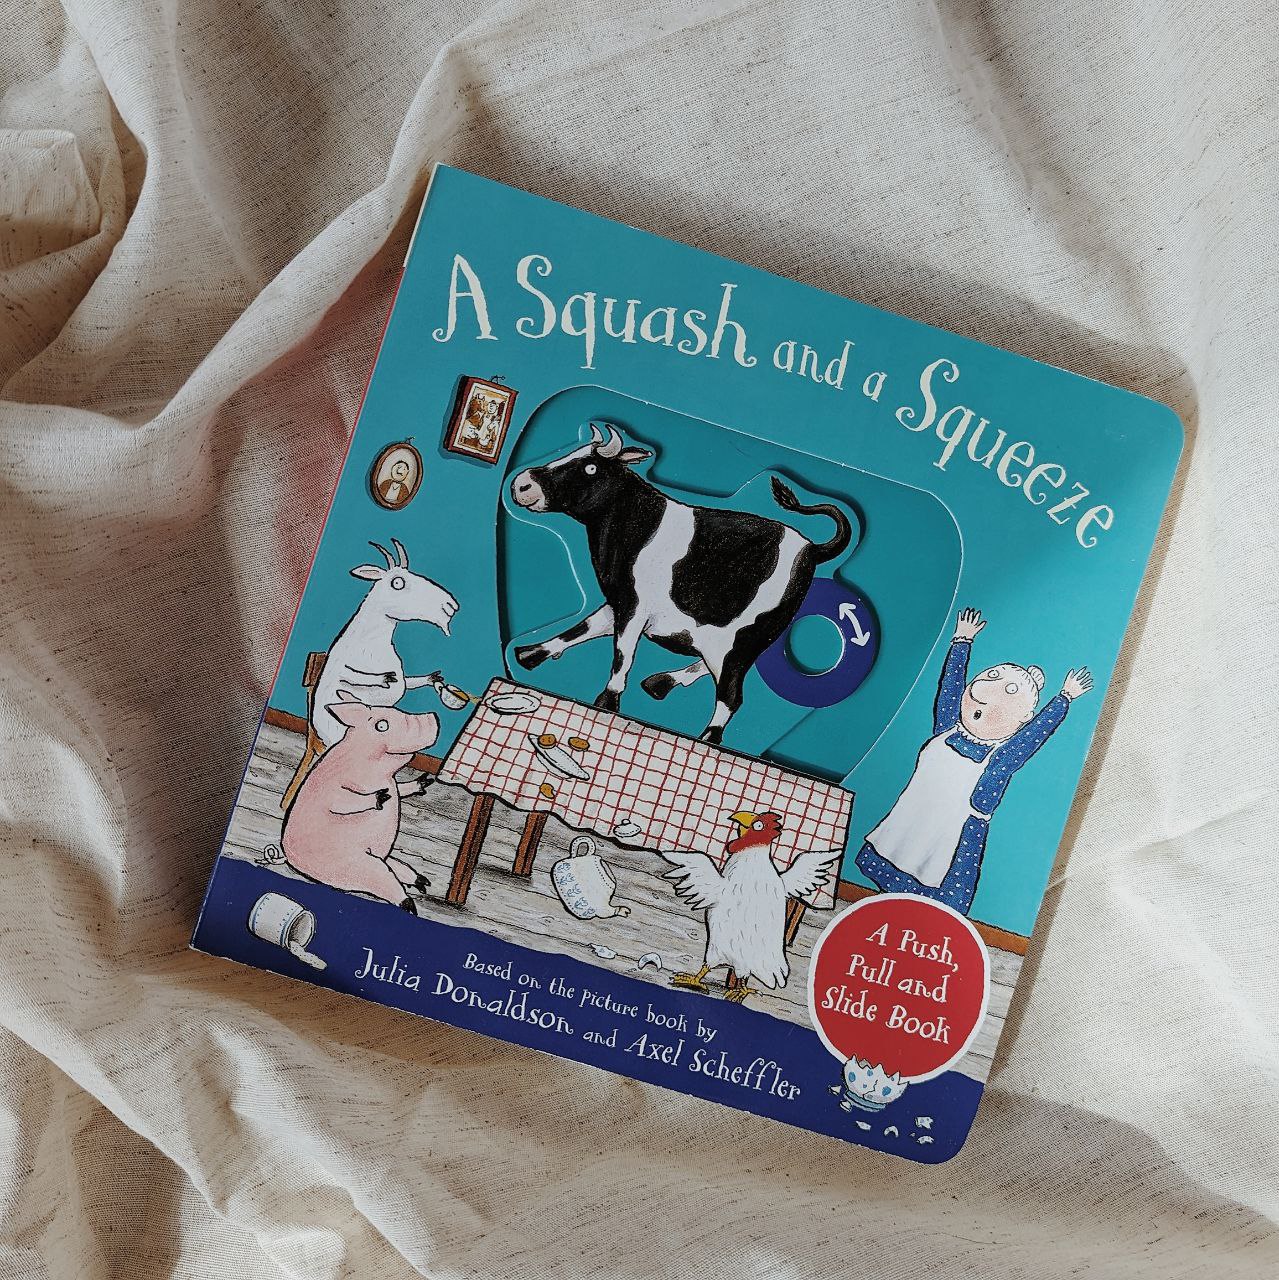 A Squash and a Squeeze: A Push, Pull and Slide Book by Julia Donaldson